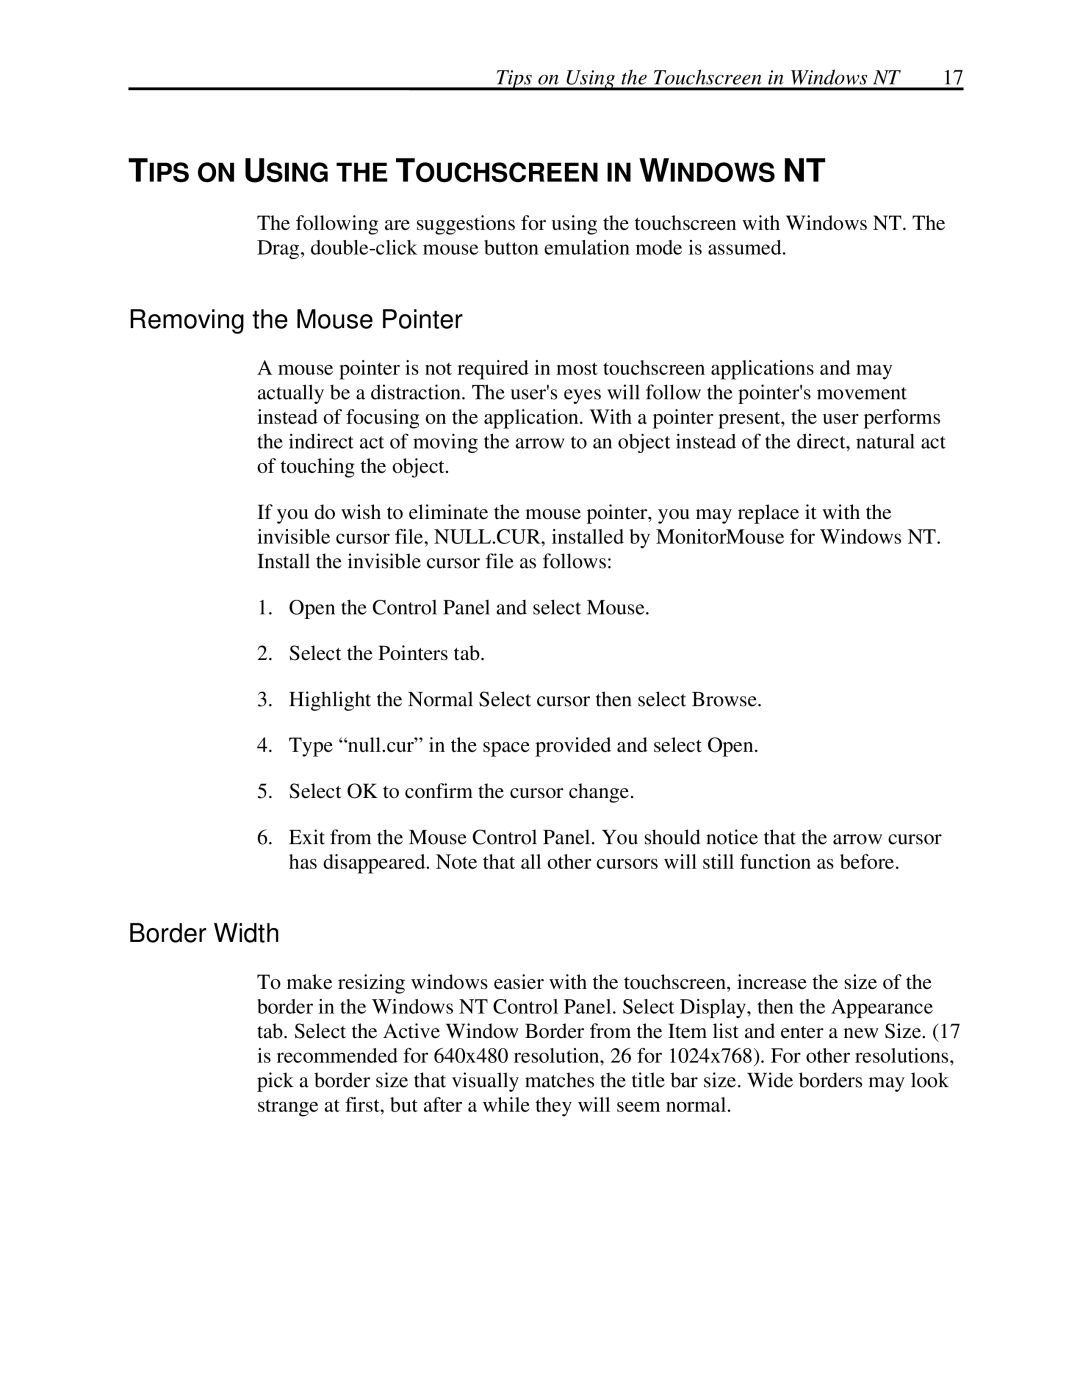 Elo TouchSystems MonitorMouse FOR WINDOWS NT Version 2.0 manual Tips On Using The Touchscreen In Windows Nt, Border Width 